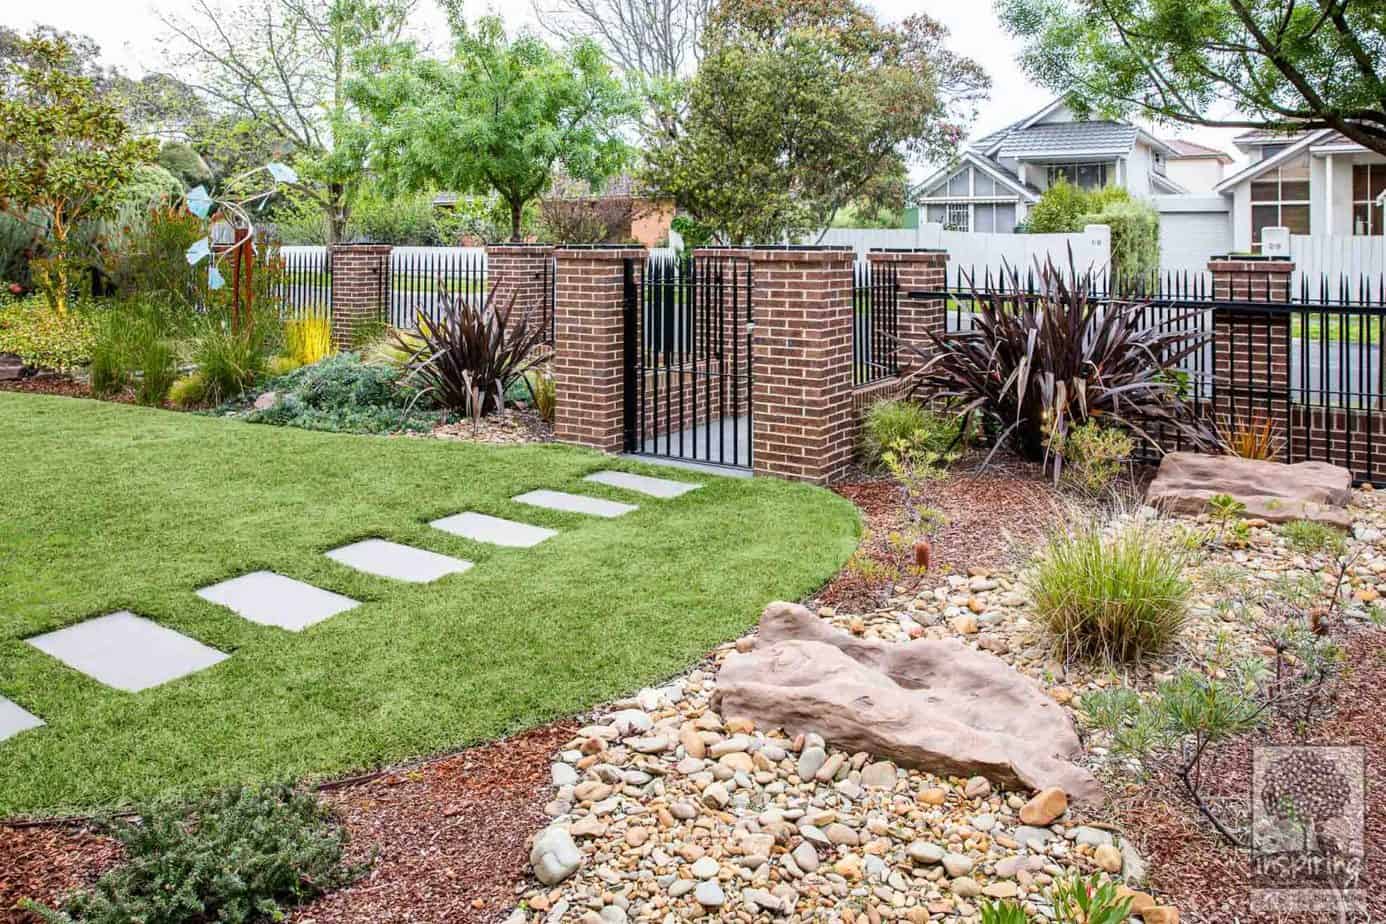 Glen Waverley garden design with dry rock creek bed and mixed planting of exotics and native Australian plants